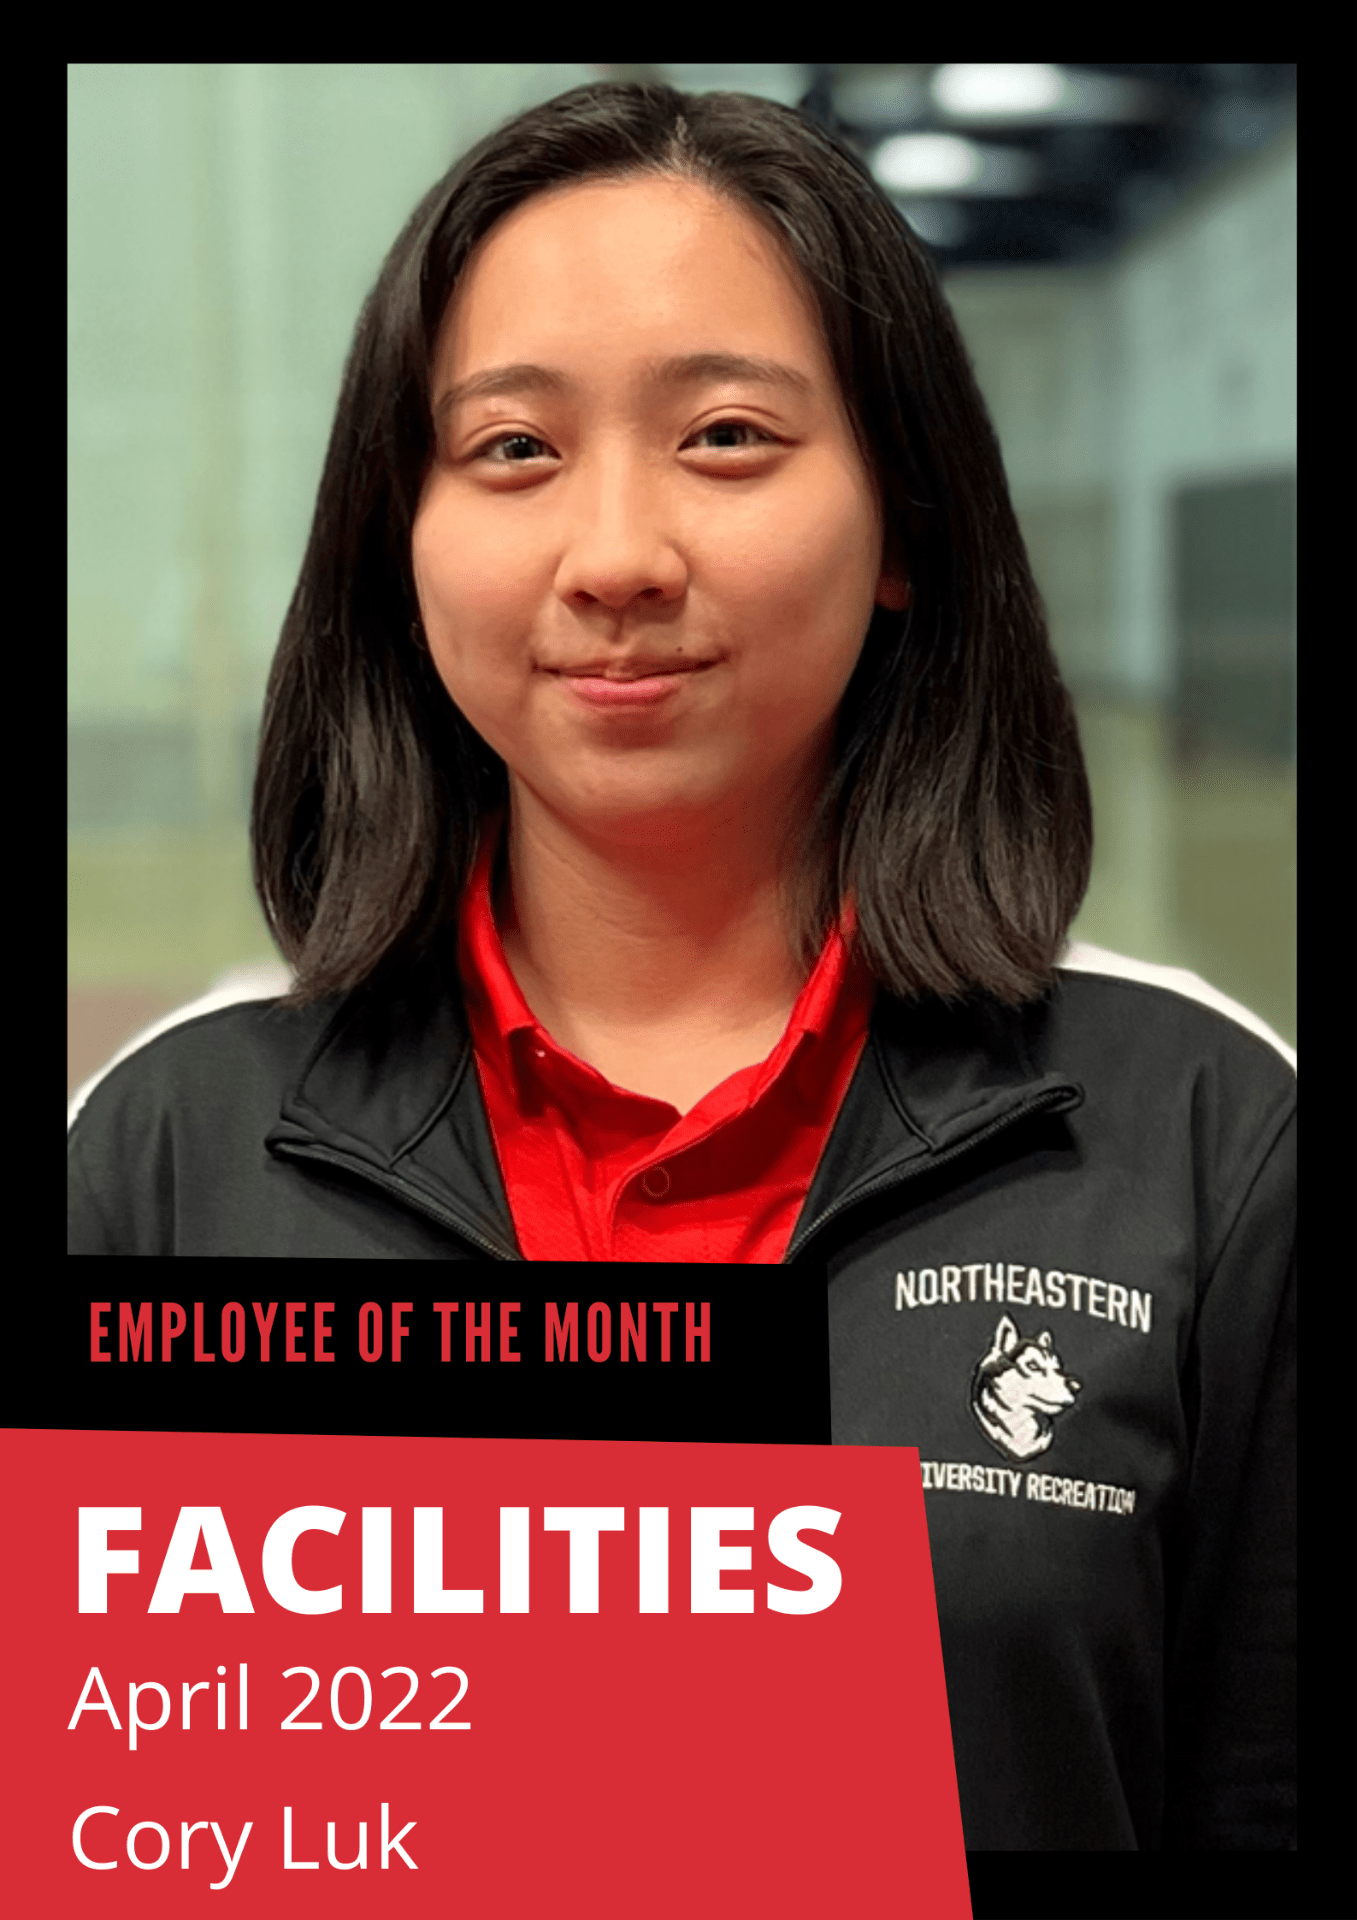 Employee of the Month, Facilities, April 2022, Cory Luk